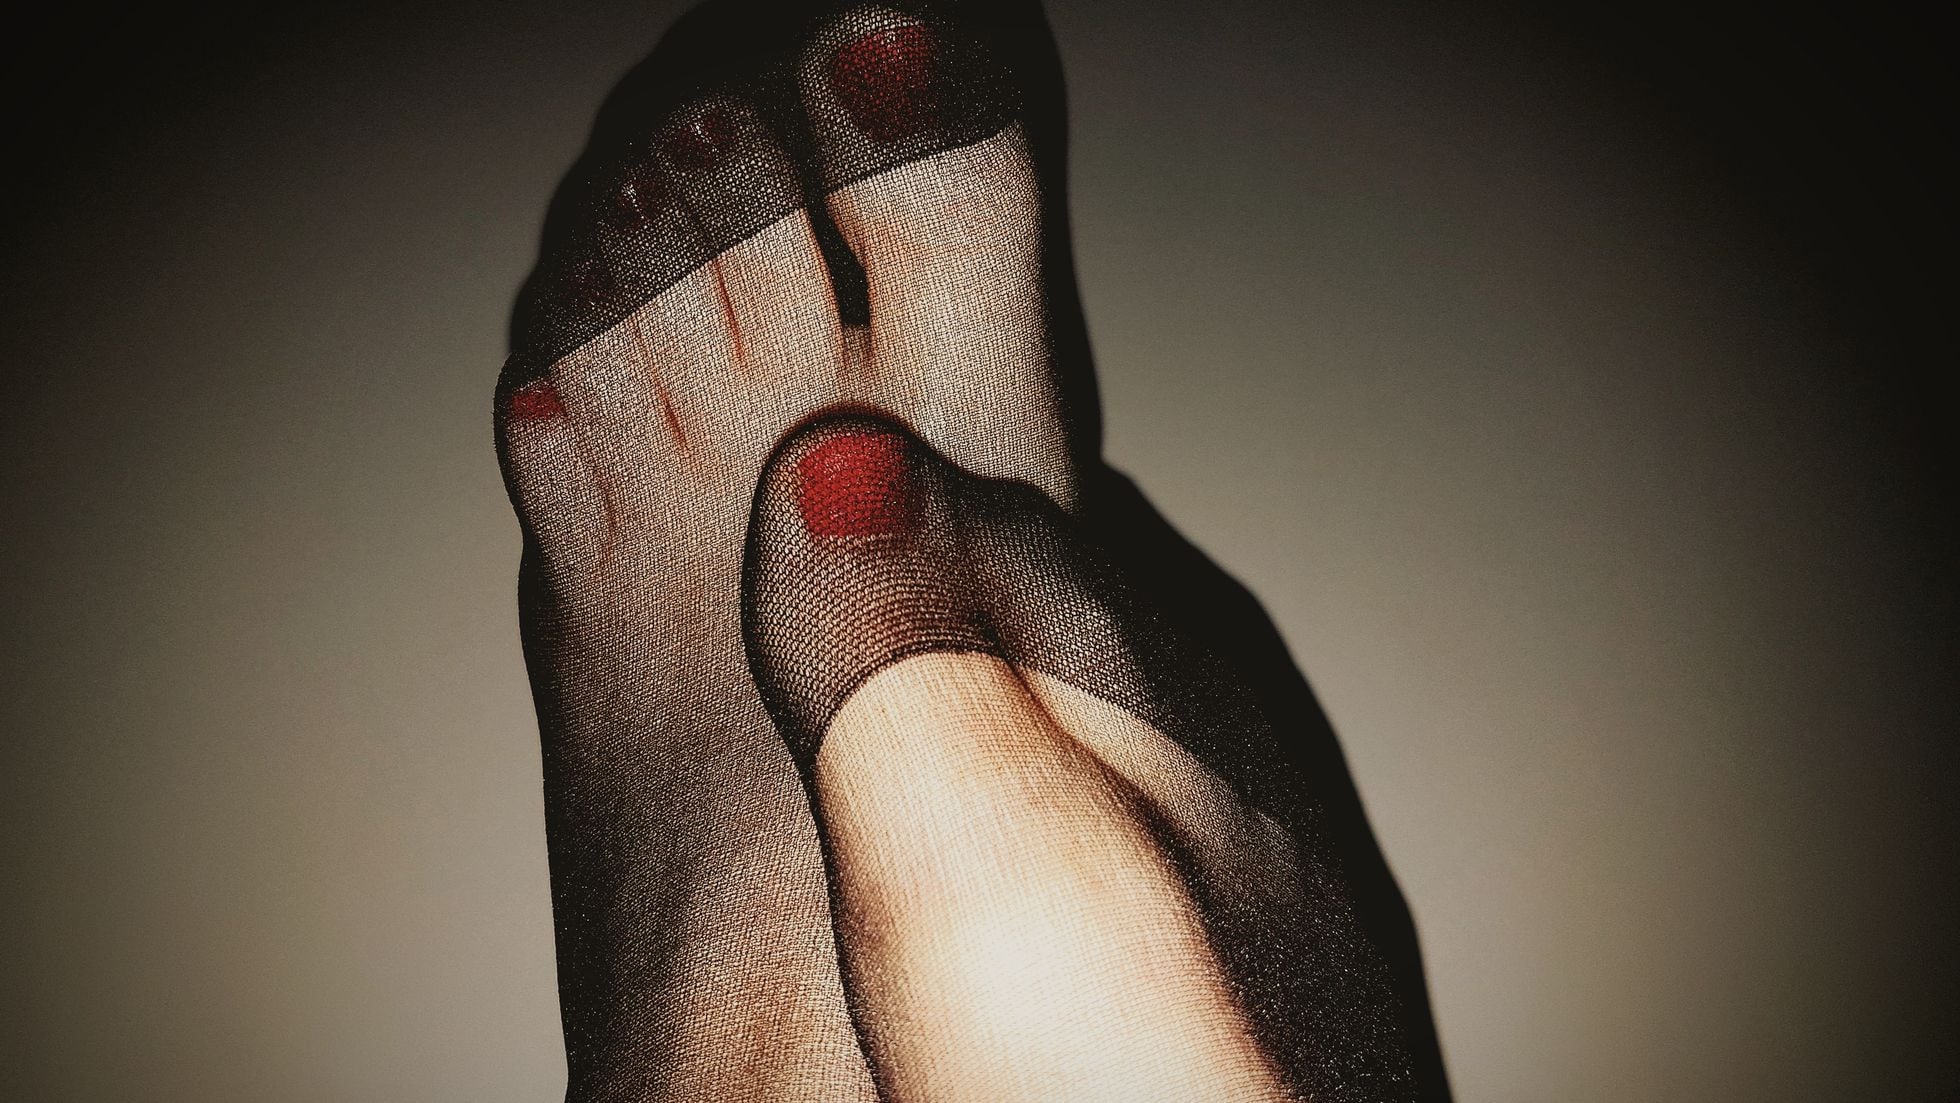 Selling photos of your feet: is it really that simple and